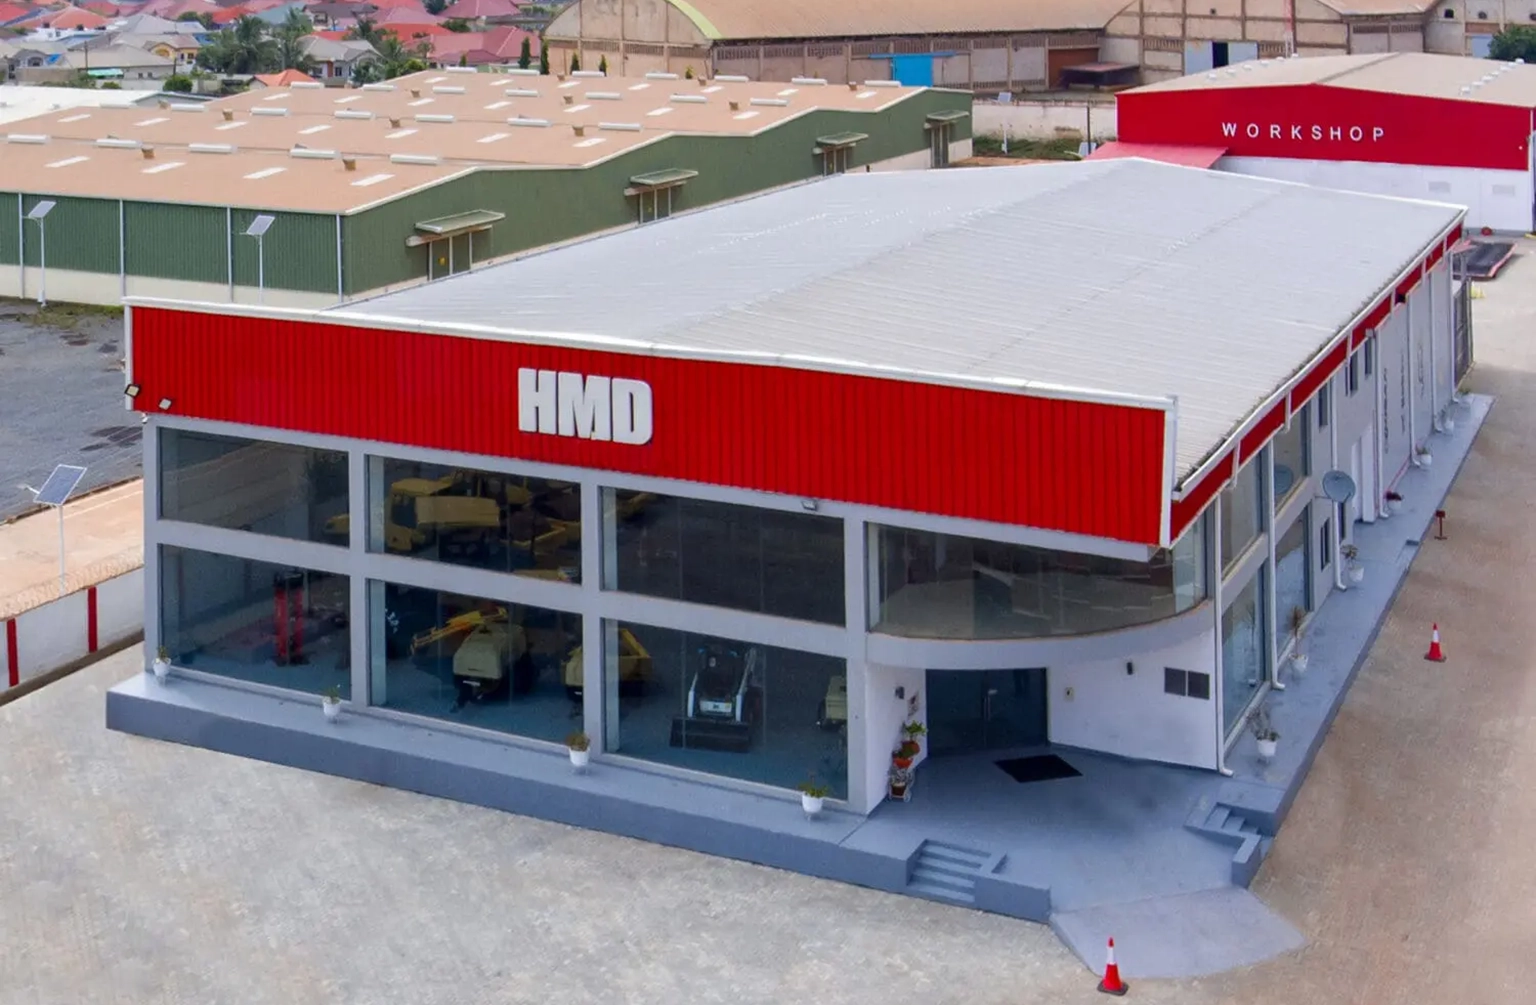 The HMD facility, in Tema, Ghana, one of several across West Africa.